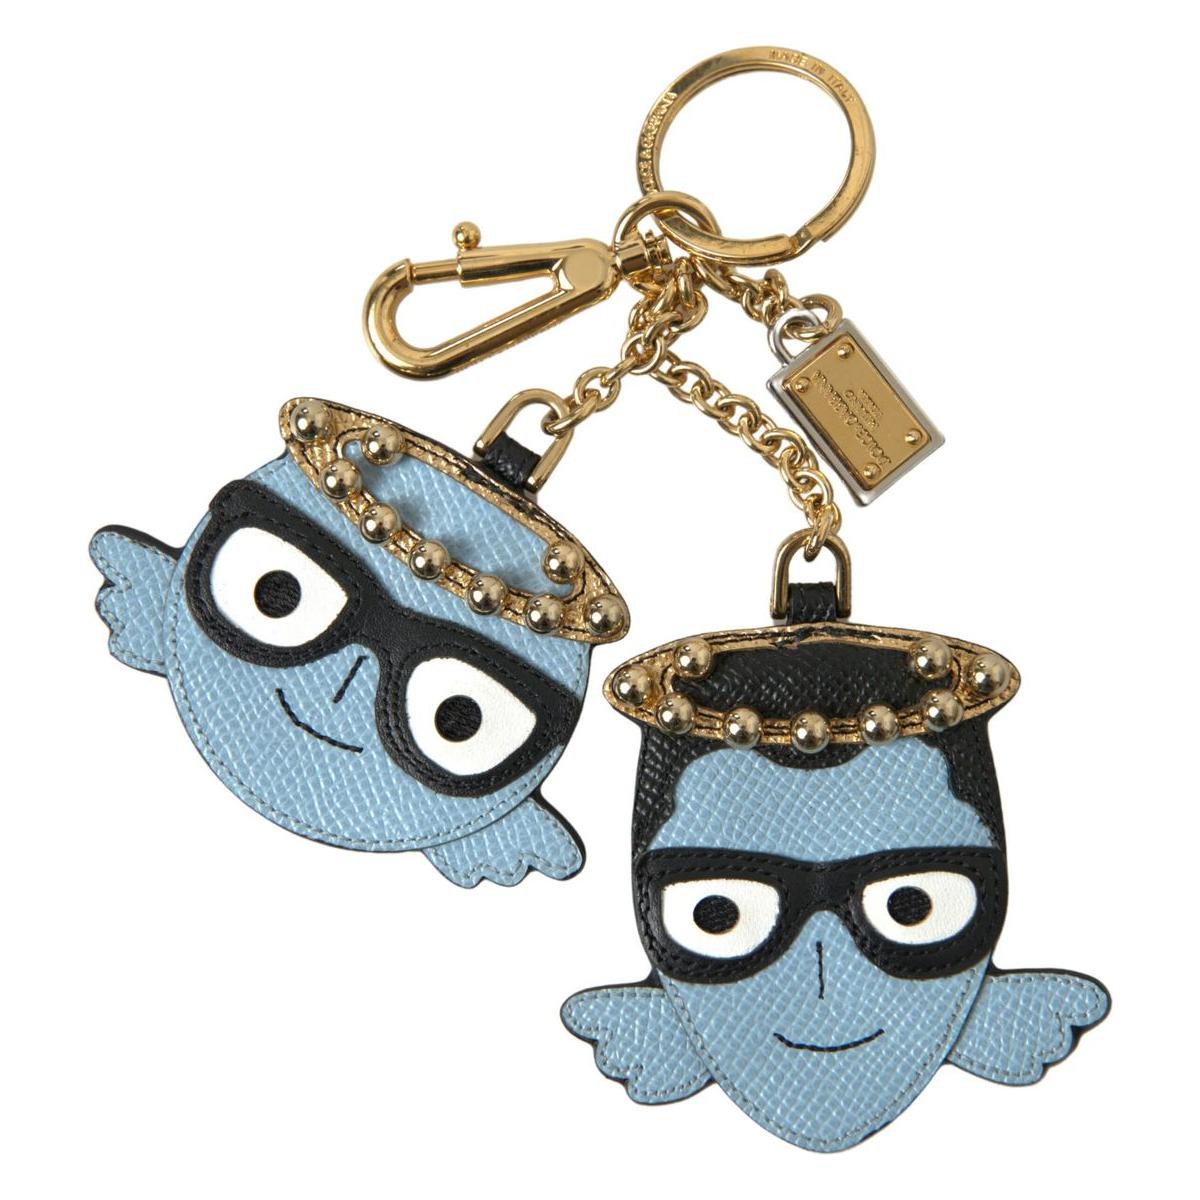 Dolce & Gabbana Chic Blue Leather Keychain with Gold Accents blue-angel-leather-dominico-stefano-keyring-keychain